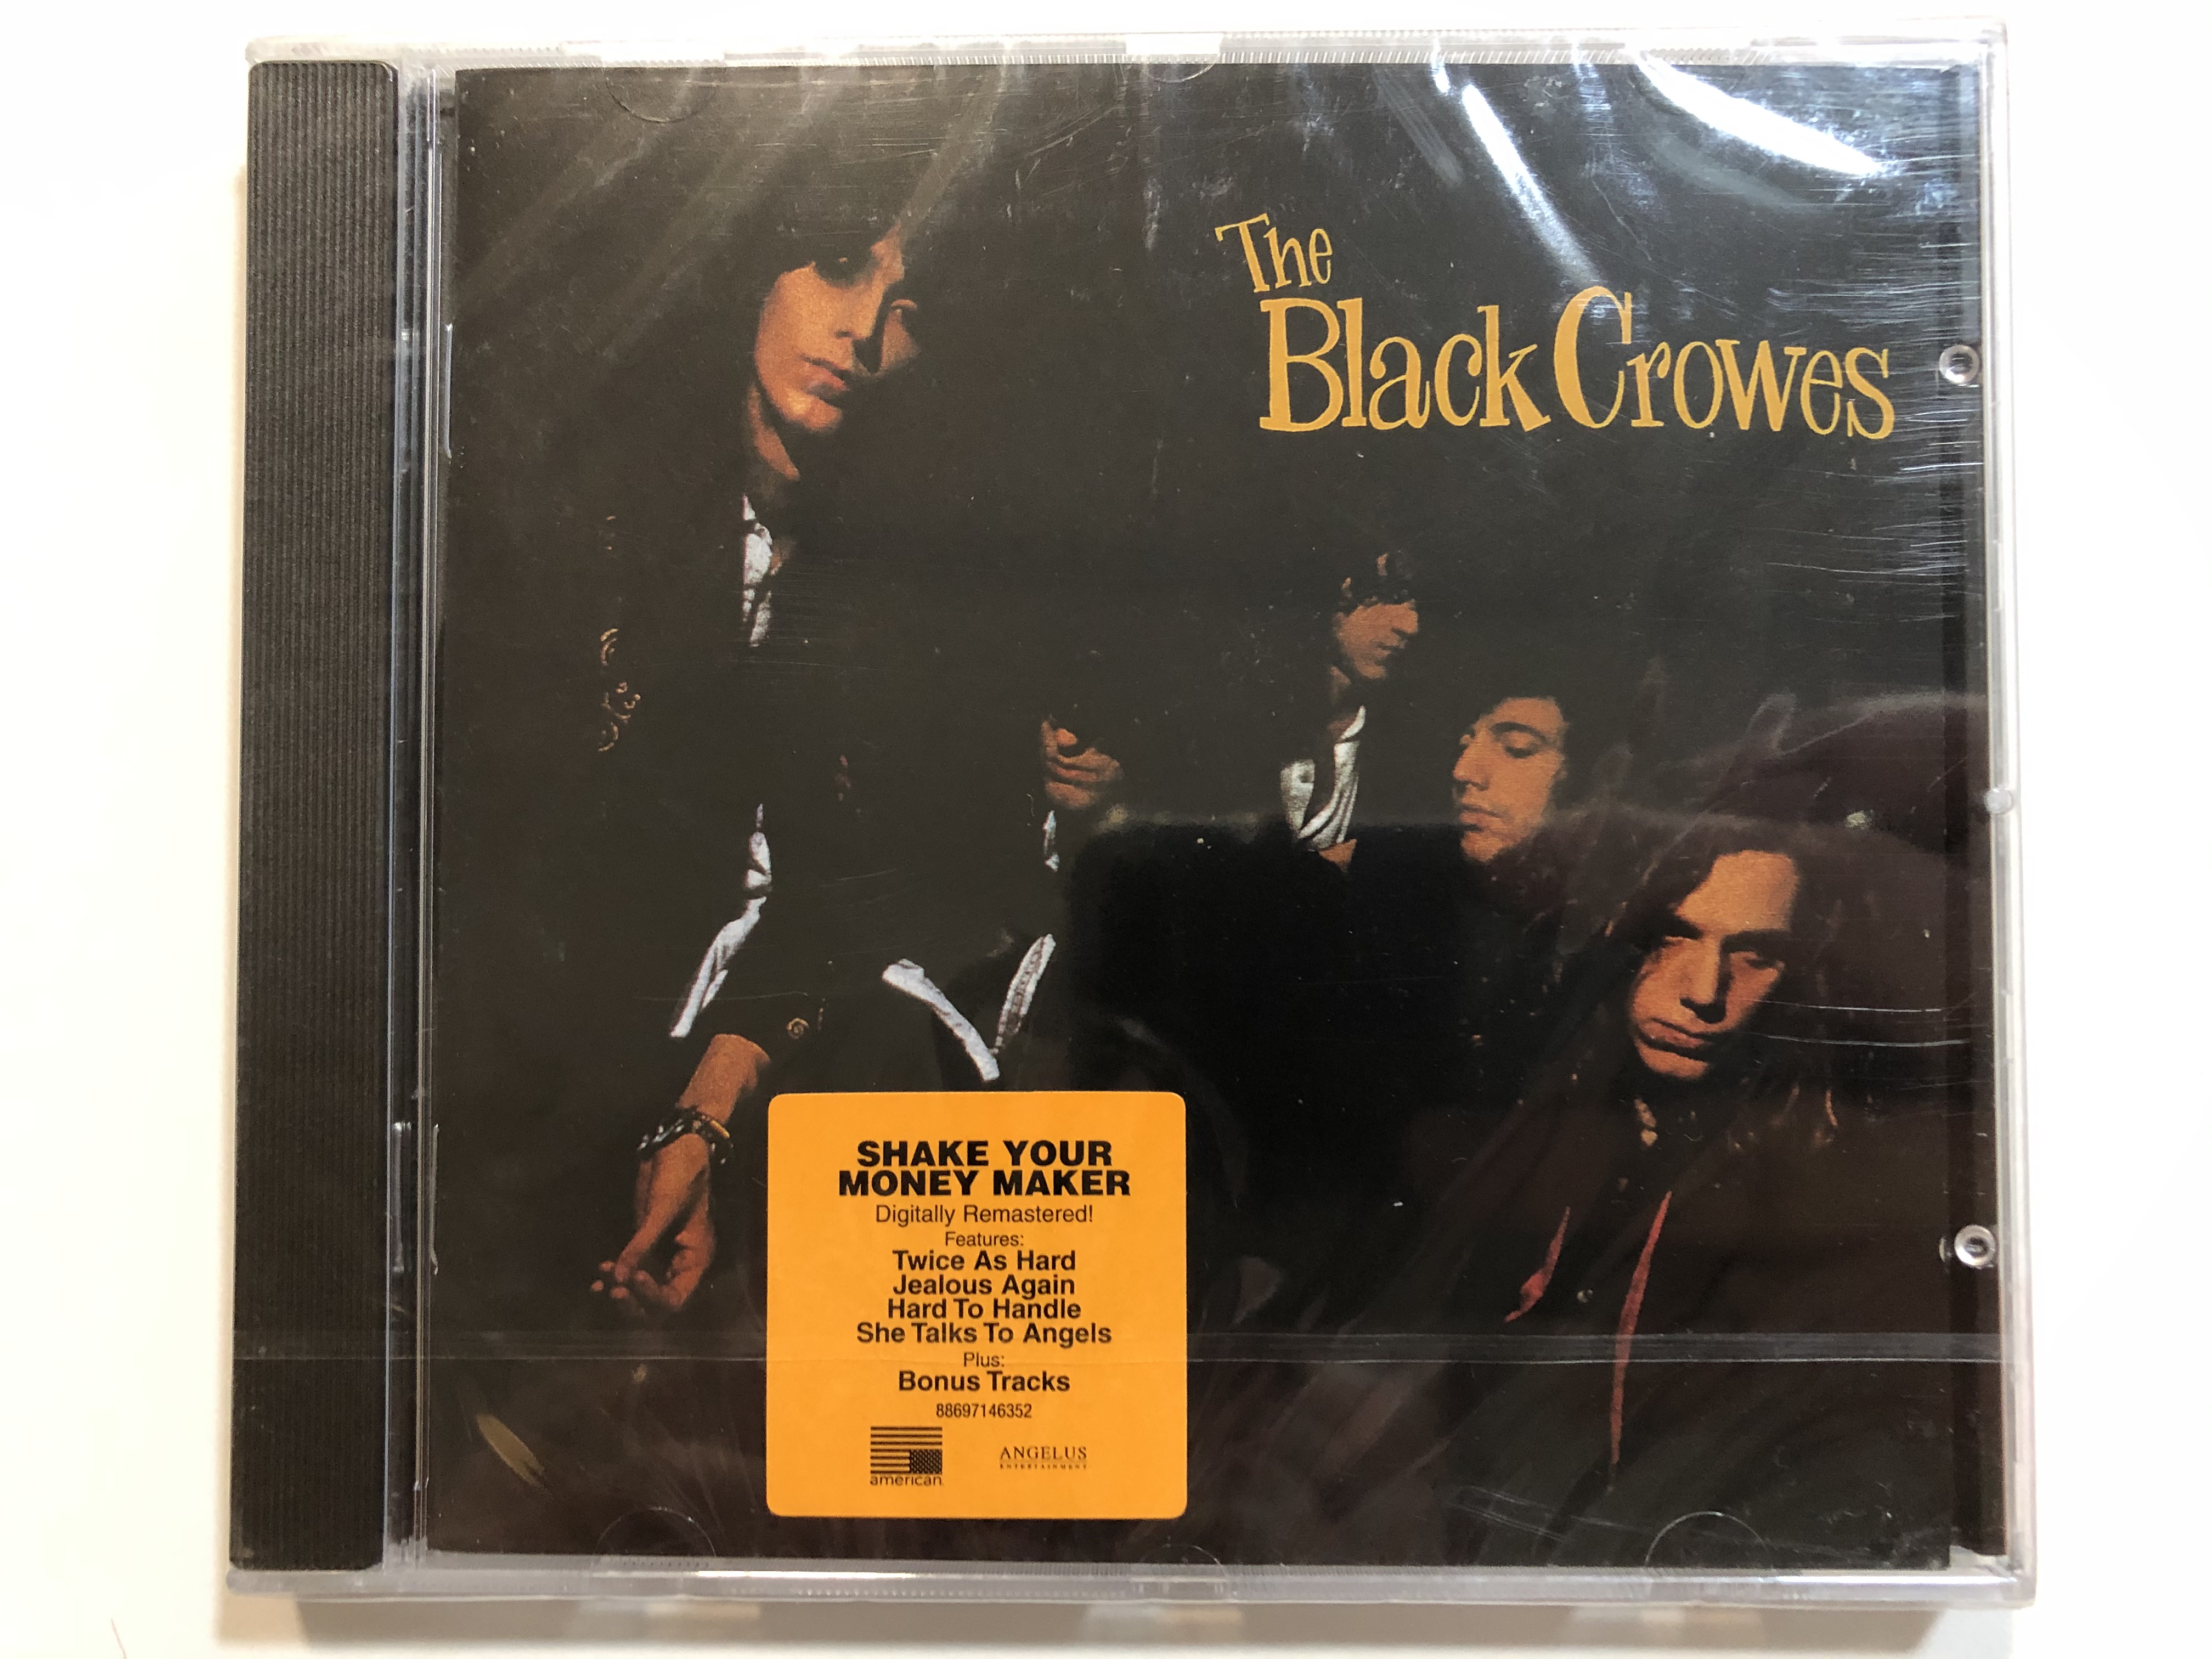 the-black-crowes-shake-your-money-maker-digitally-remastered-features-twice-as-hard-jealous-again-hard-to-handle-she-talks-to-angels.-plus-bonus-tracks-american-recordings-audio-cd-8-1-.jpg